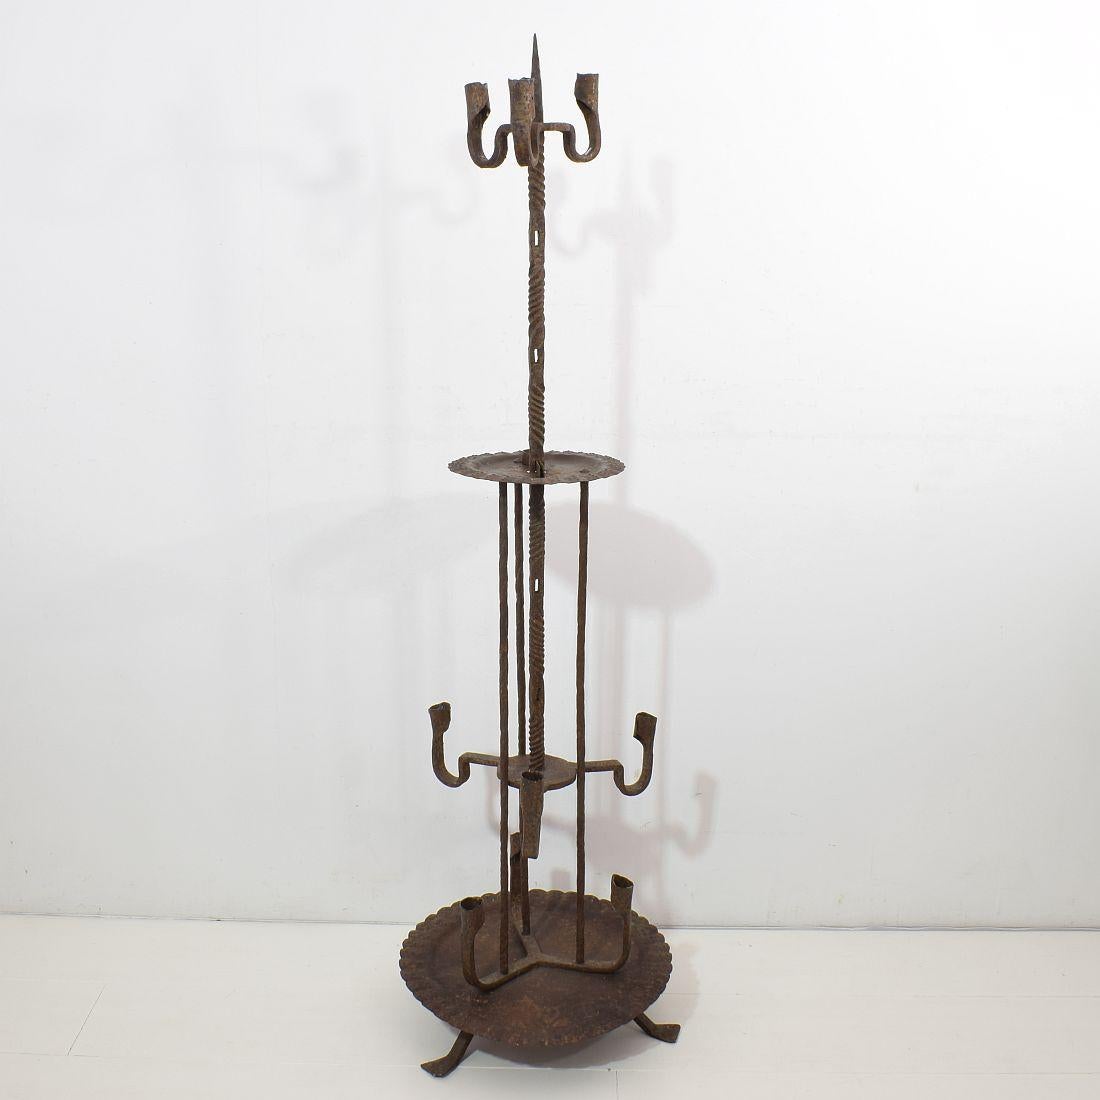 Spectacular hand forged iron candleholder that can be adjusted in height.
Spain, circa 1650-1750
Measures: H 102/151cm, W 36cm, D 36cm
Good but weathered condition.